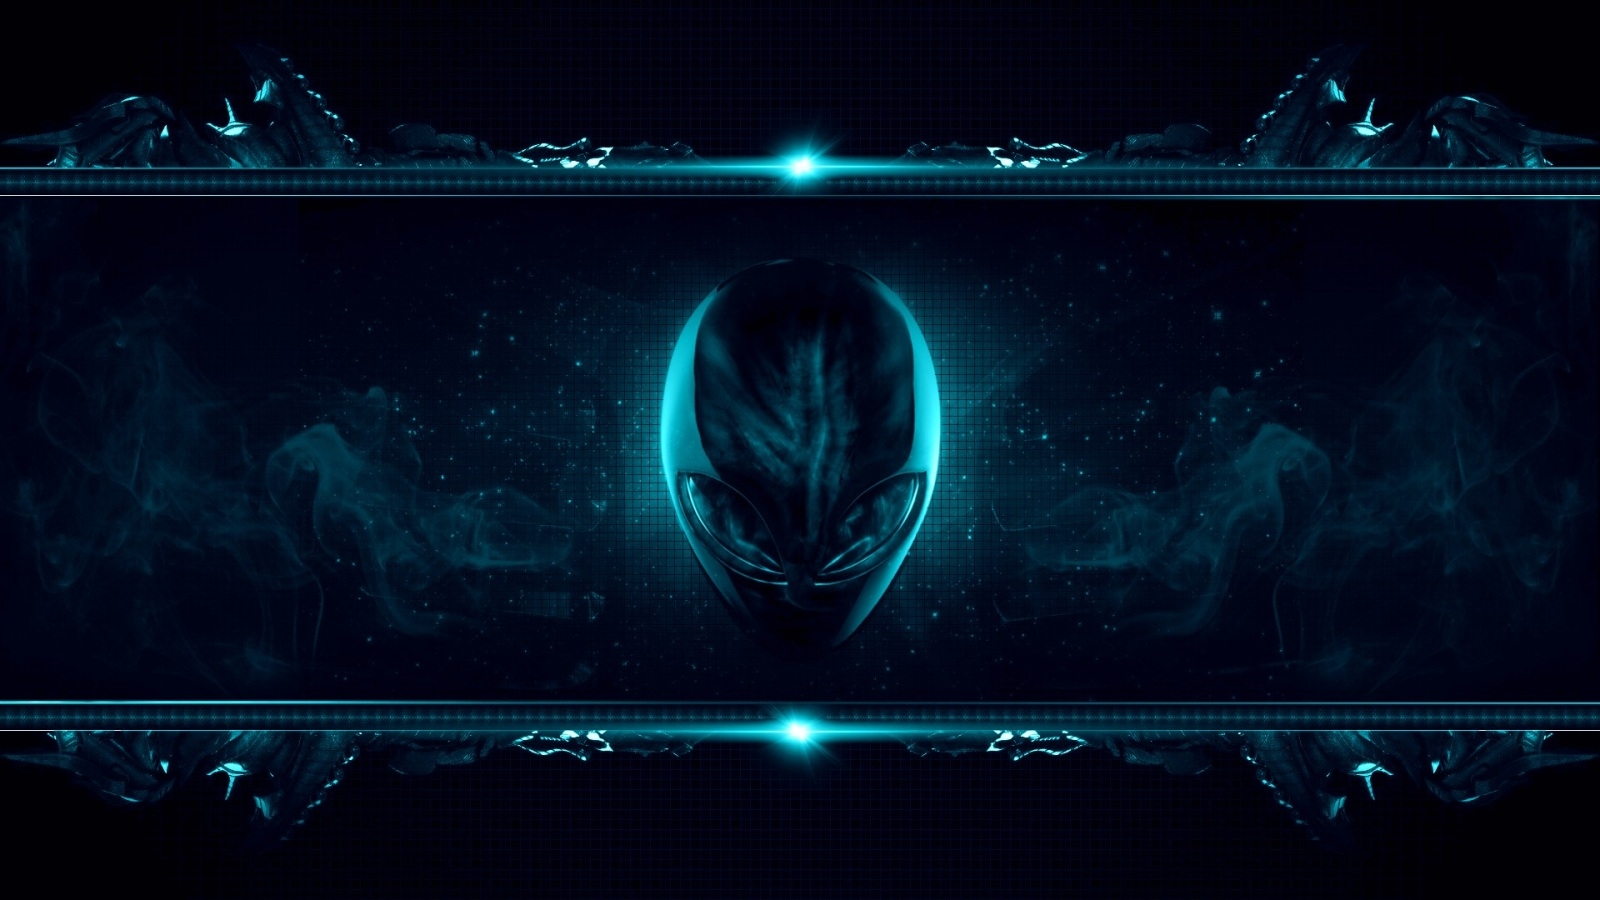  Alienware HQ Background Wallpapers